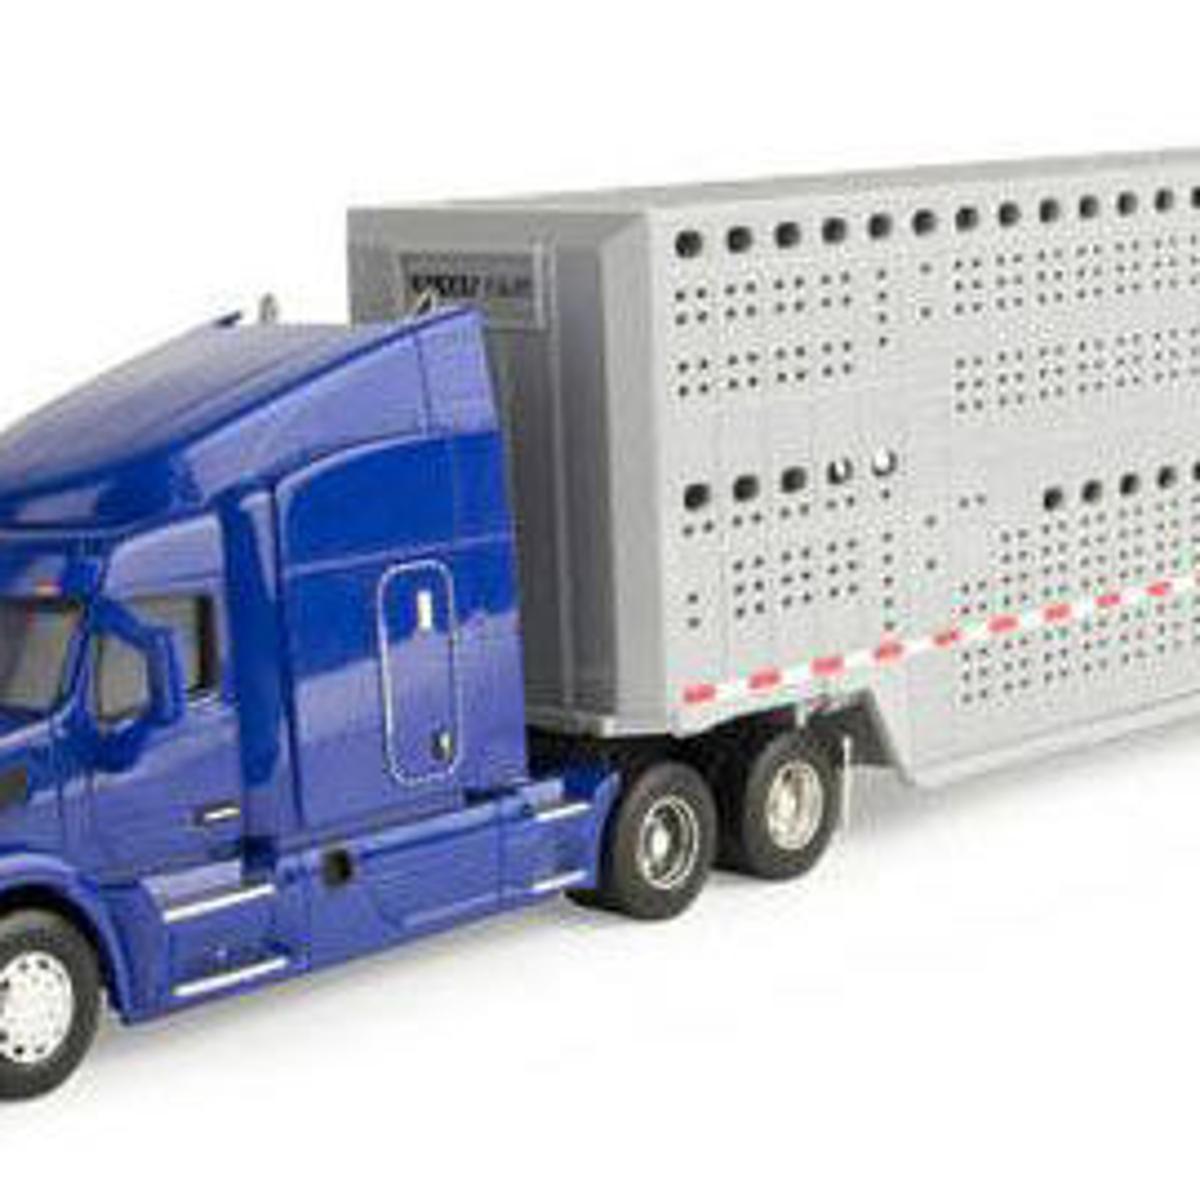 Toy truck sparks controversy from animal rights groups | Lifestyles |  